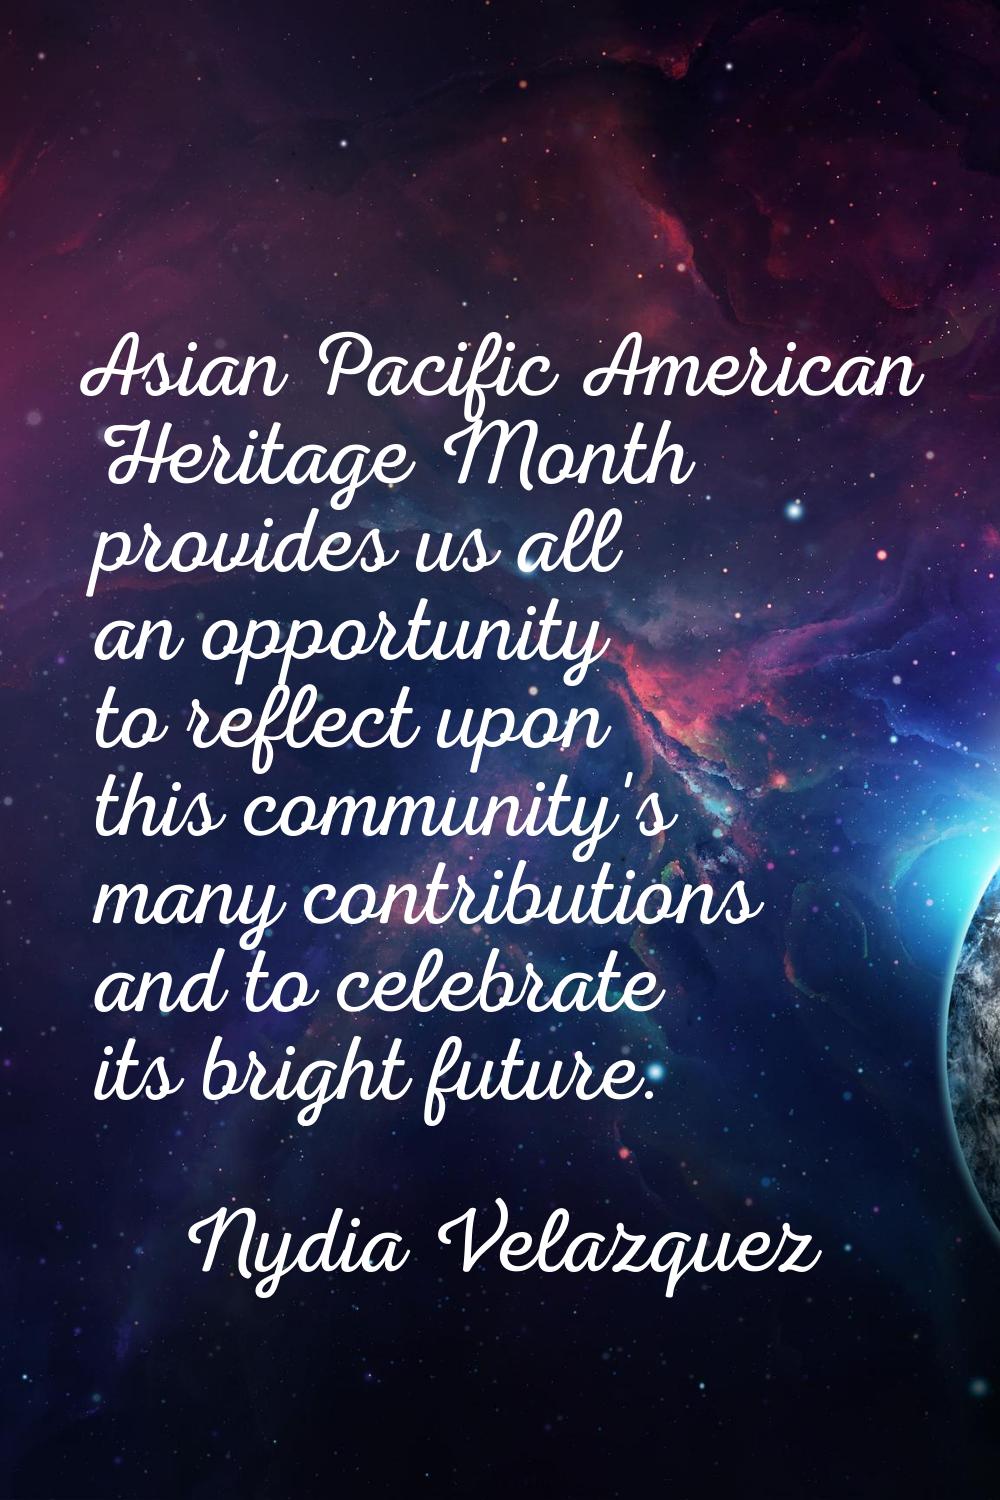 Asian Pacific American Heritage Month provides us all an opportunity to reflect upon this community